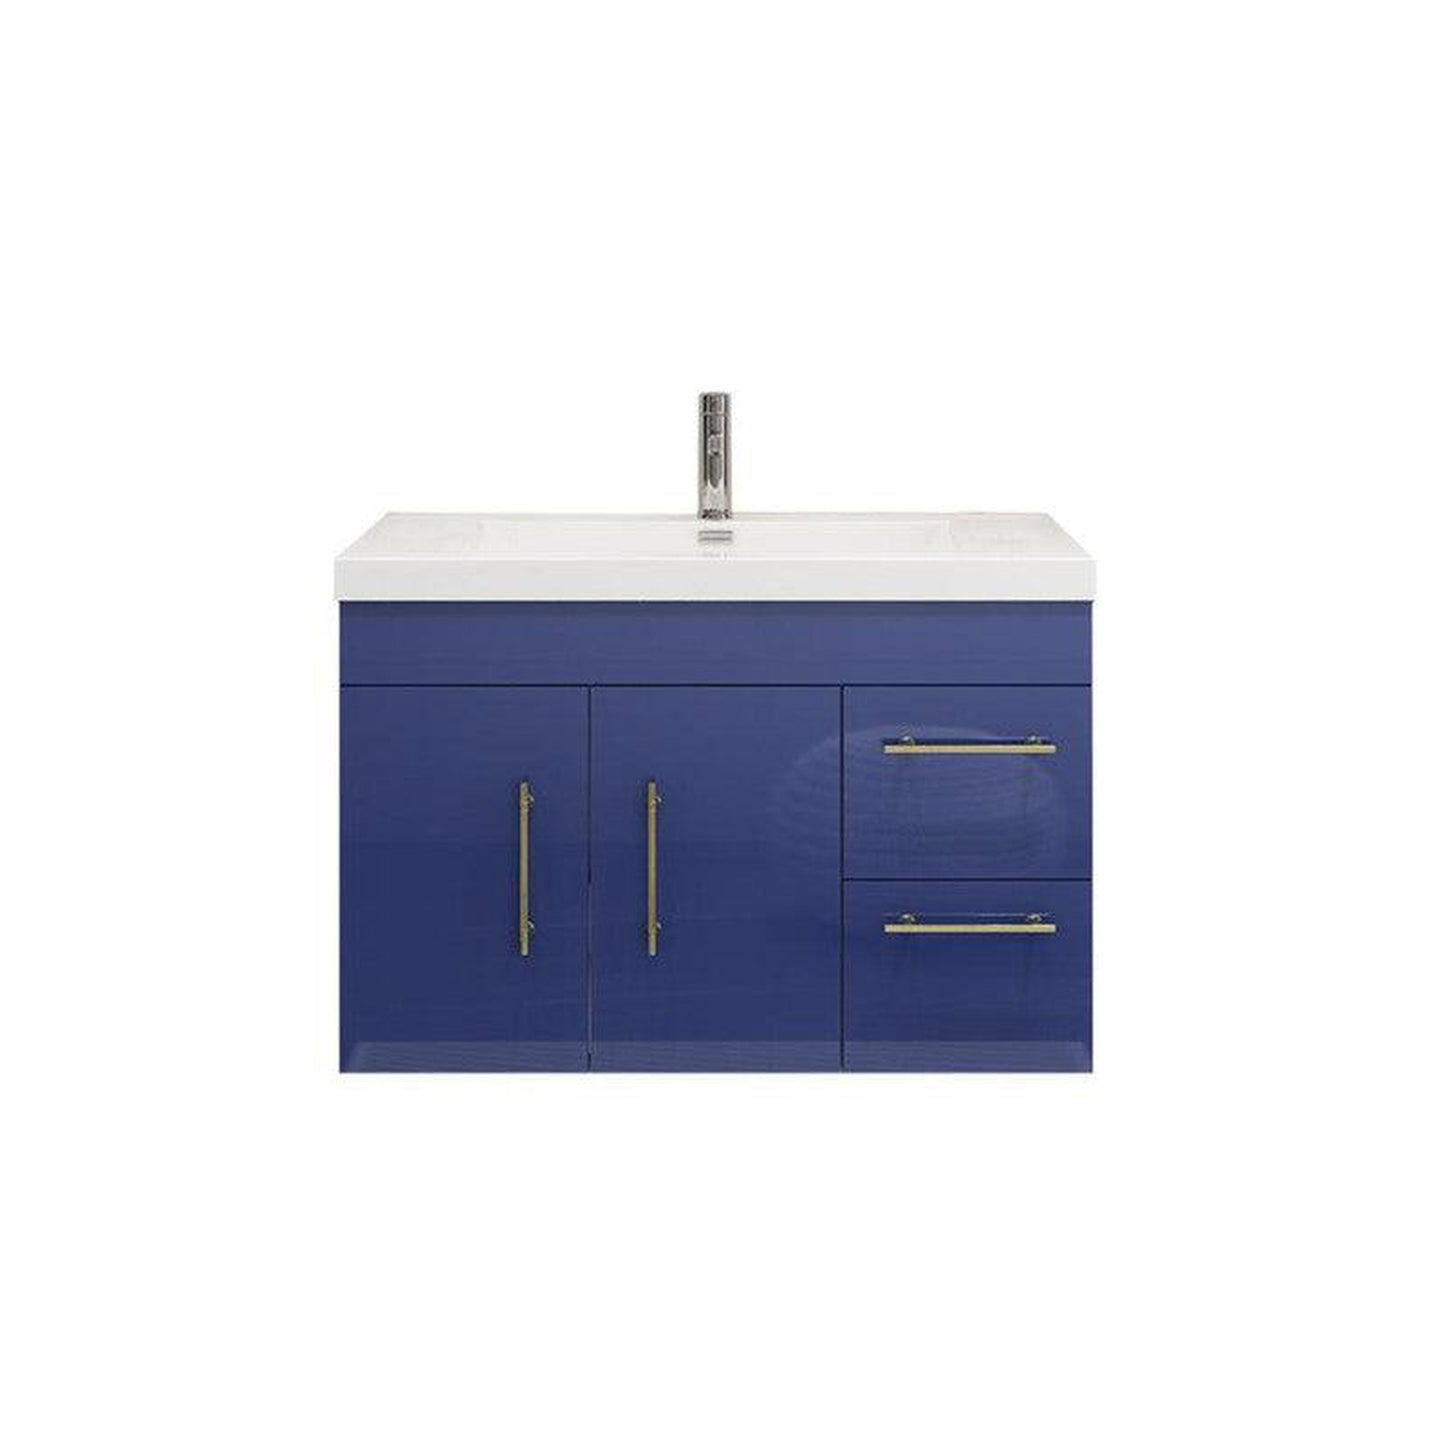 Moreno Bath ELSA 36" High Gloss Night Blue Wall-Mounted Vanity With Right Side Drawers and Single Reinforced White Acrylic Sink